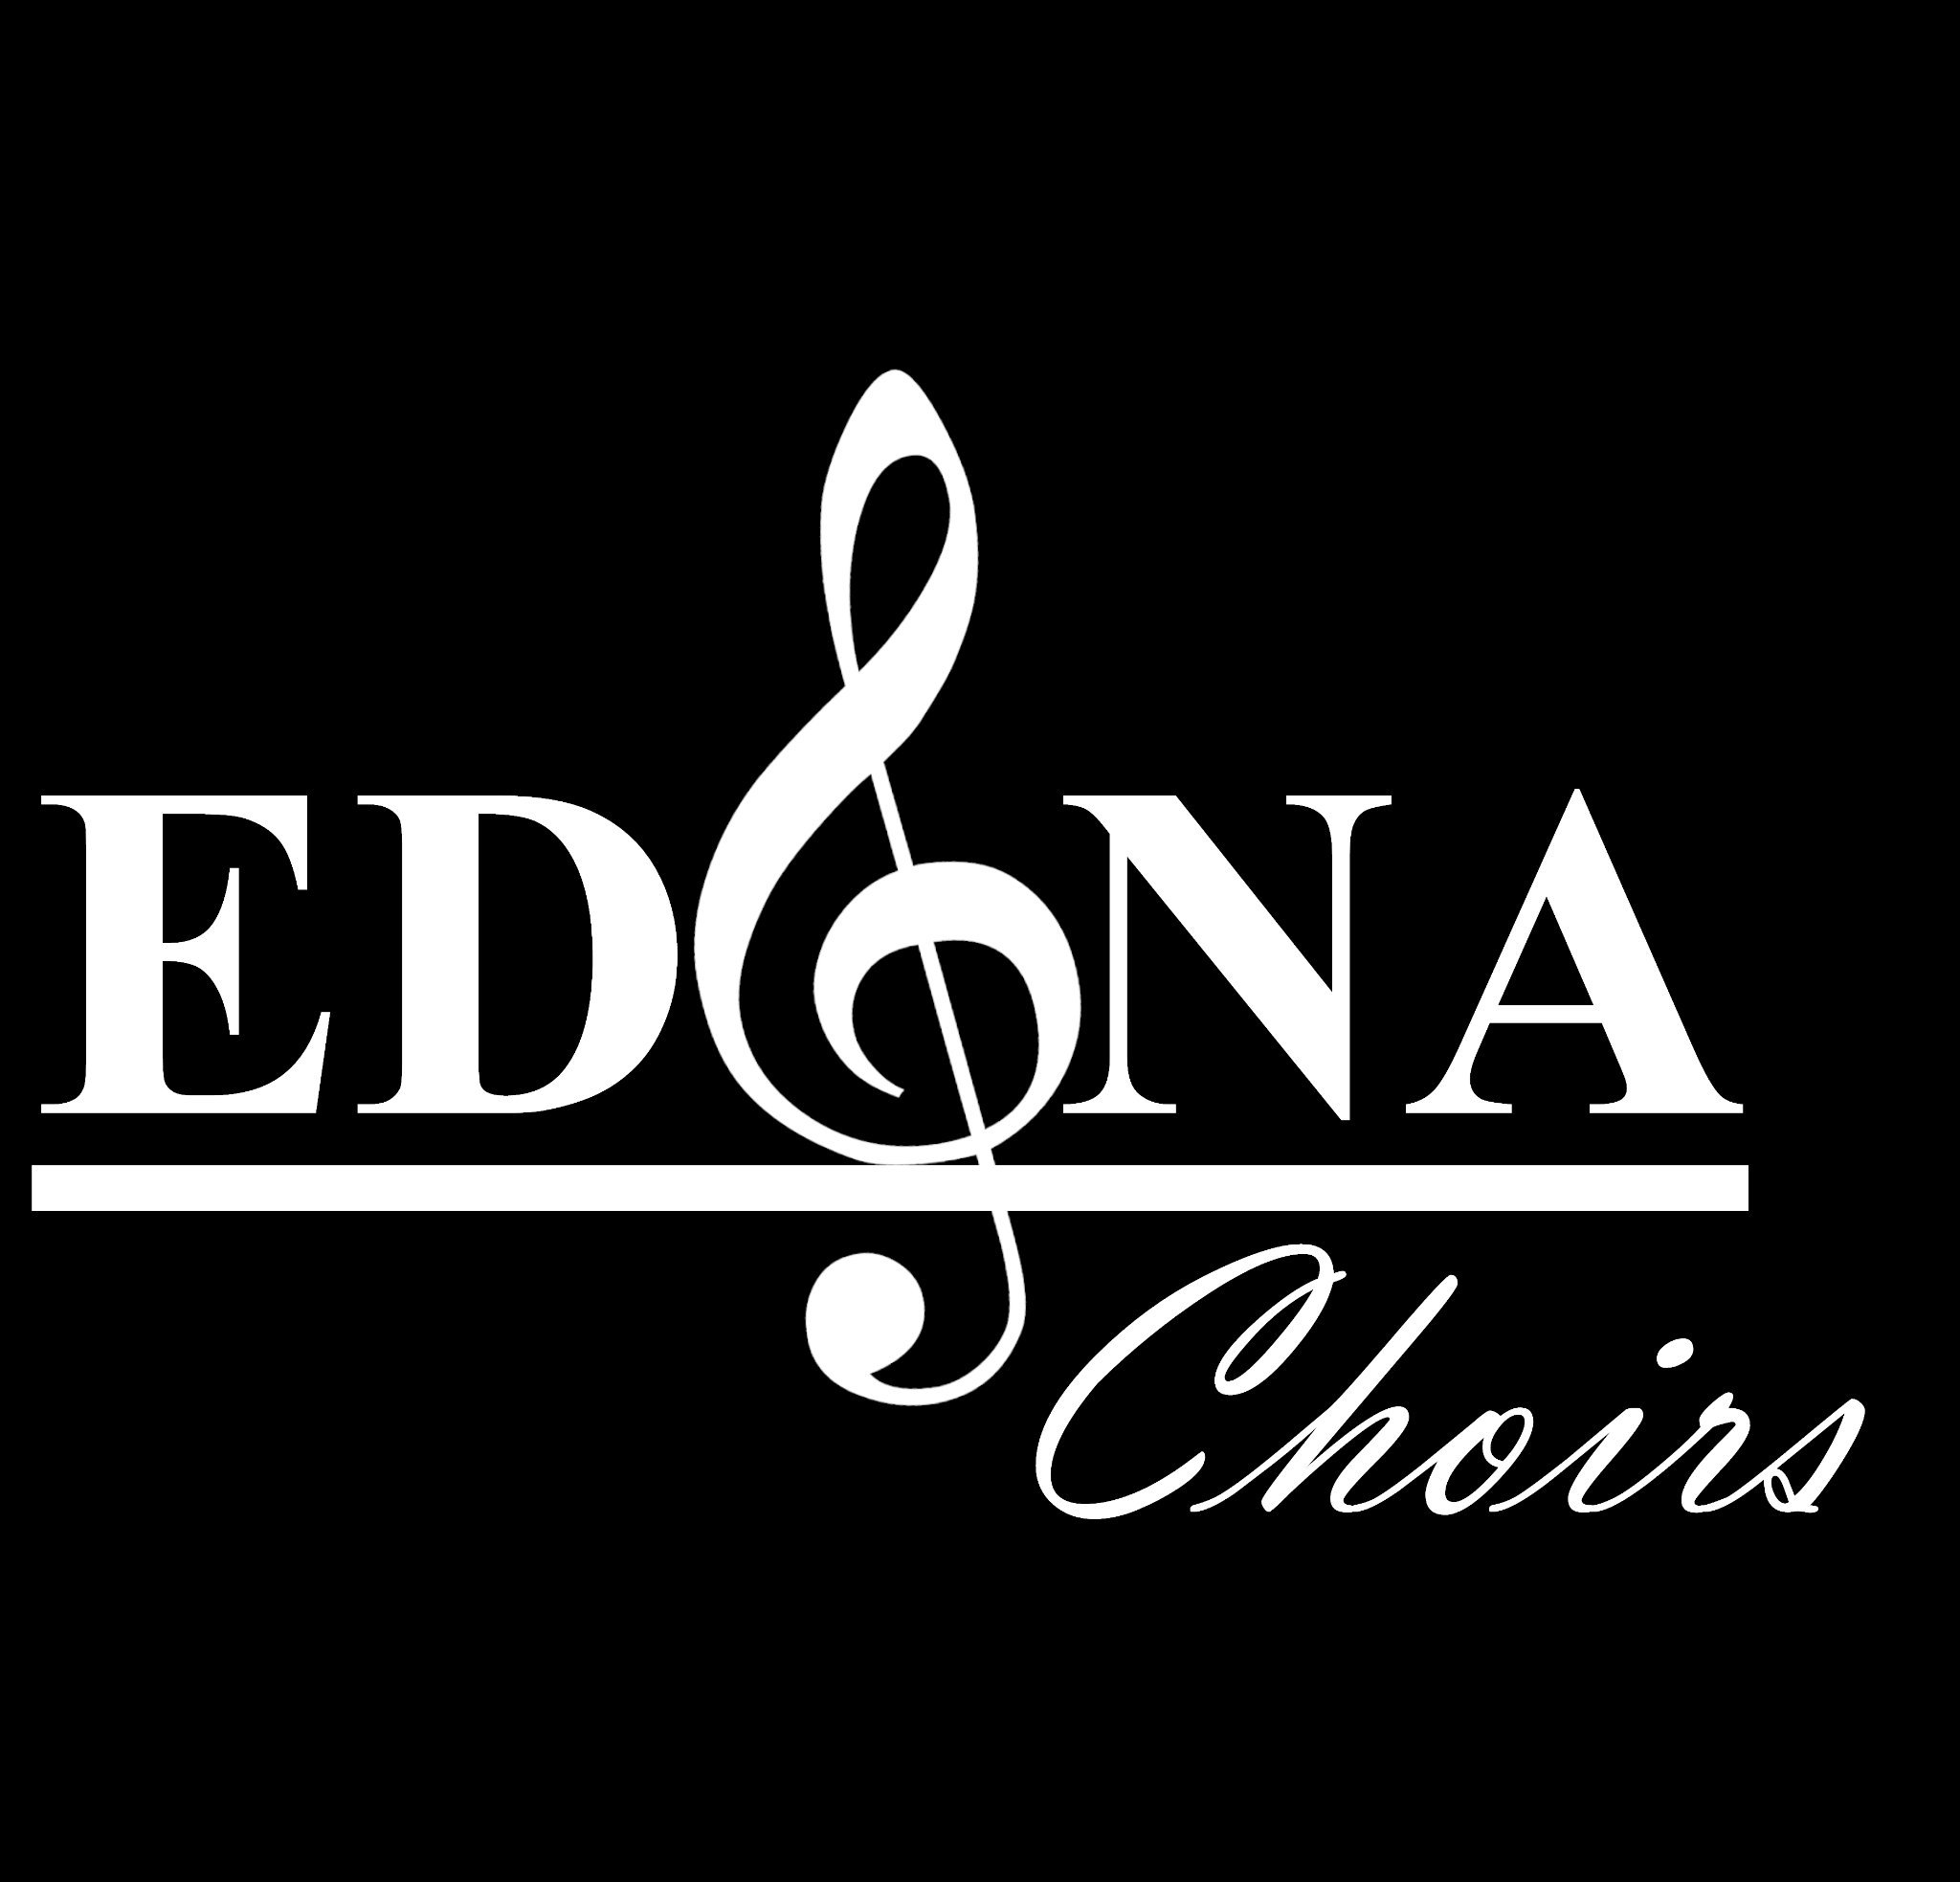 More than 500 students in grades 9 - 12 sing in the Edina High School Choral program. Our goal is lifelong musical skills and enjoyment for all singers.